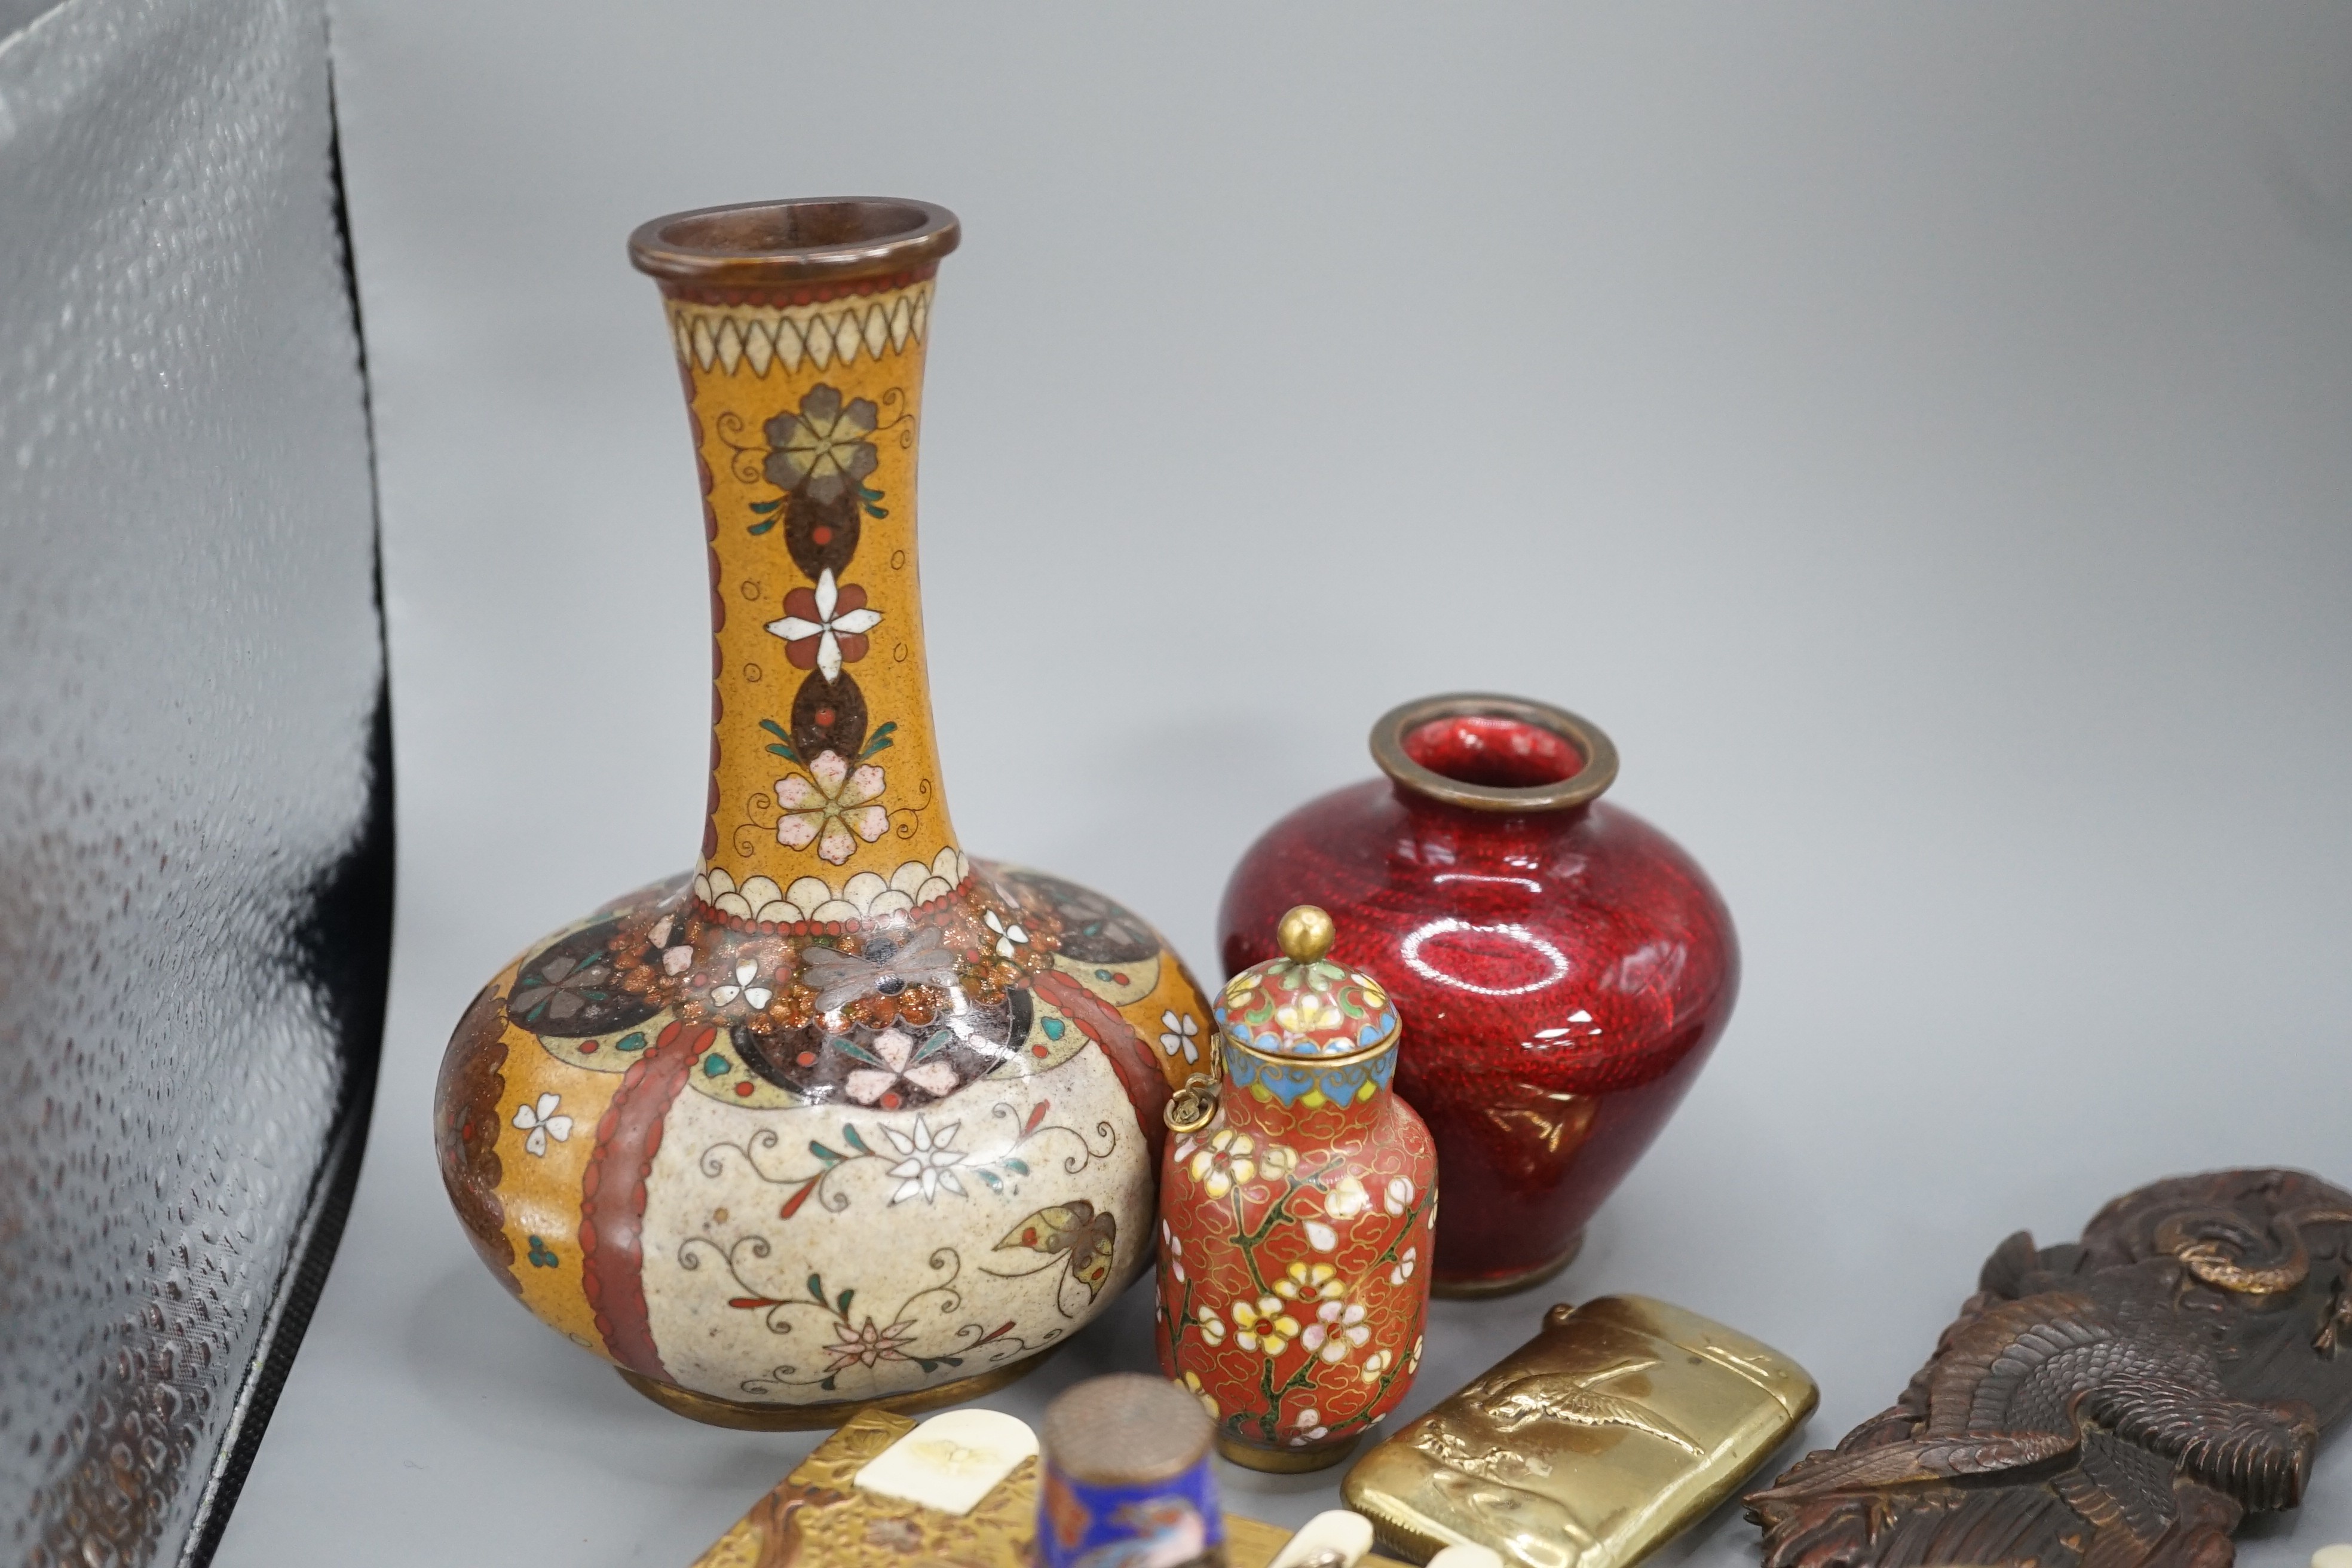 A group of Chinese and Japanese miniature cloisonne enamel vases, 6cm - 12.5cm, a Japanese mixed metal paper knife or page turner and a pair of Japanese antimony and celluloid bezique markers